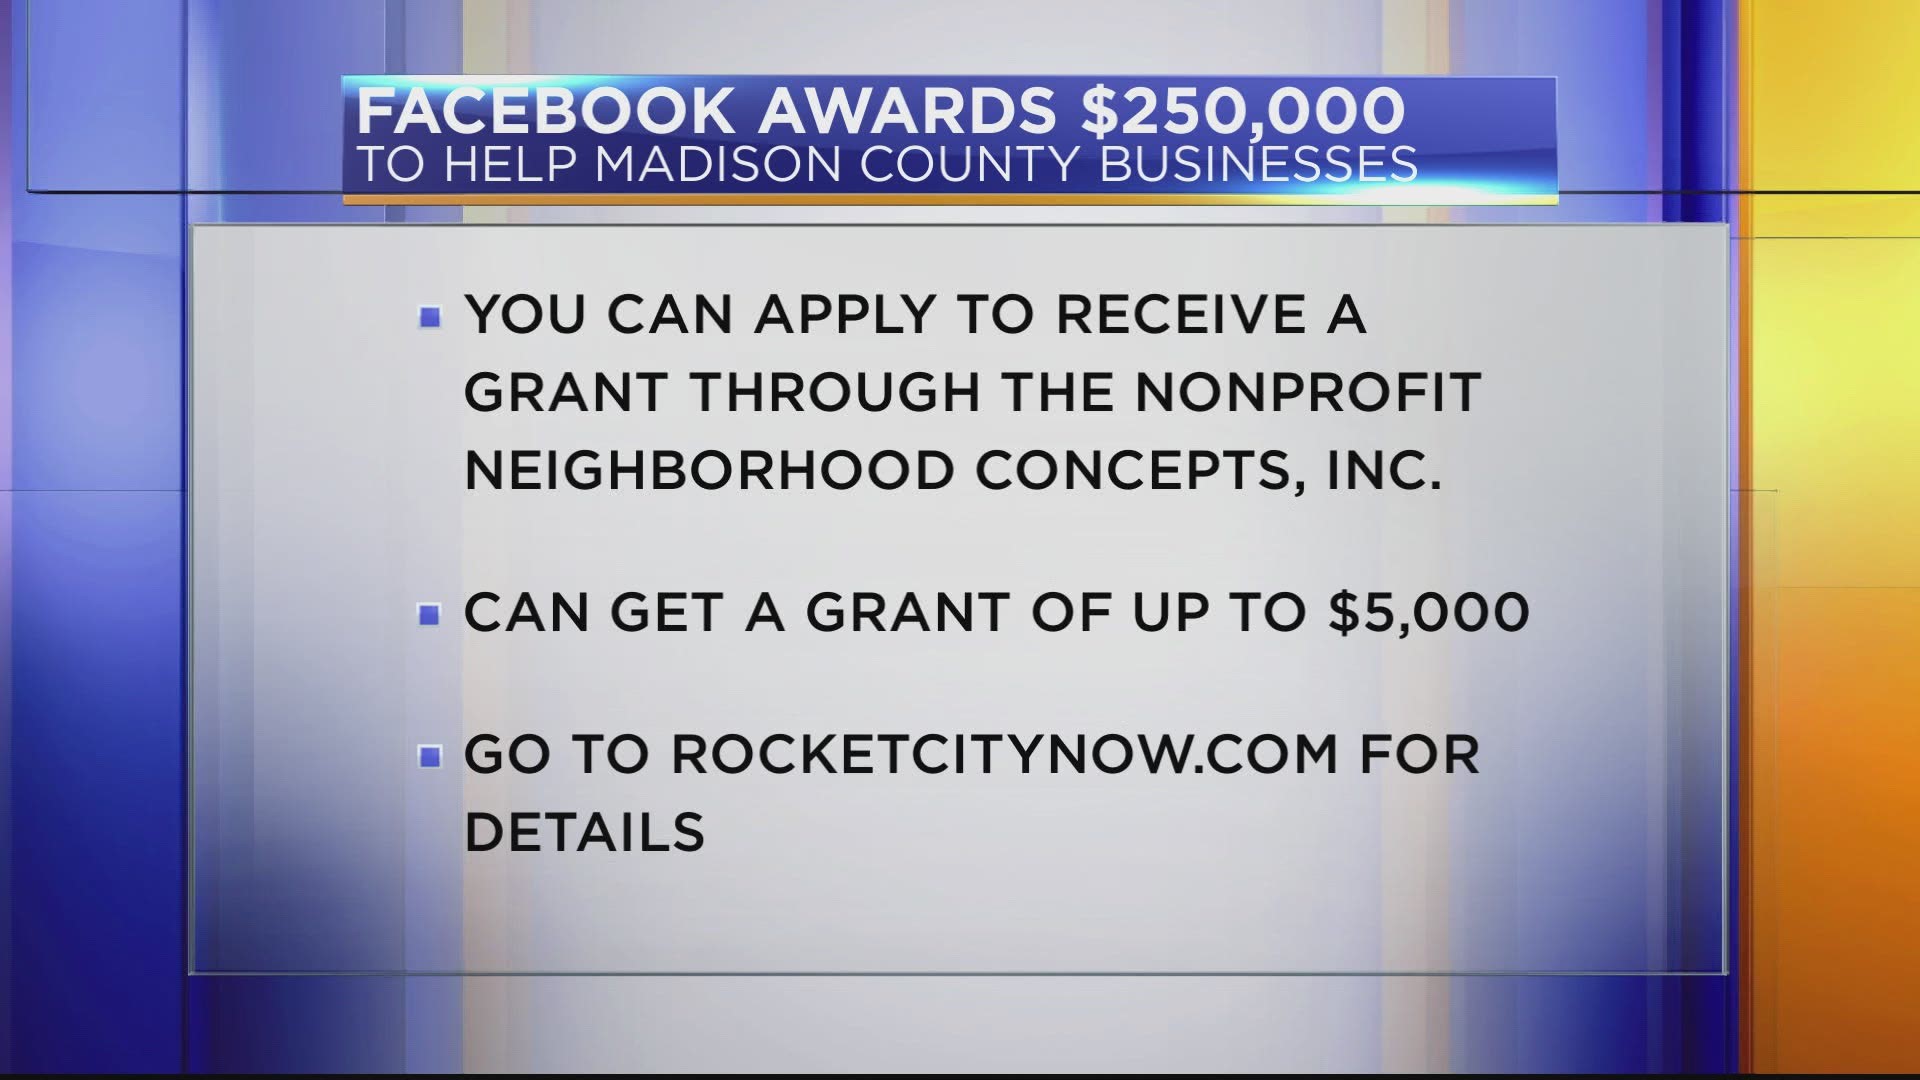 Facebook has awarded a $250,000 grant to Huntsville-based nonprofit NCI to be distributed to Madison County small businesses impacted by COVID-19.